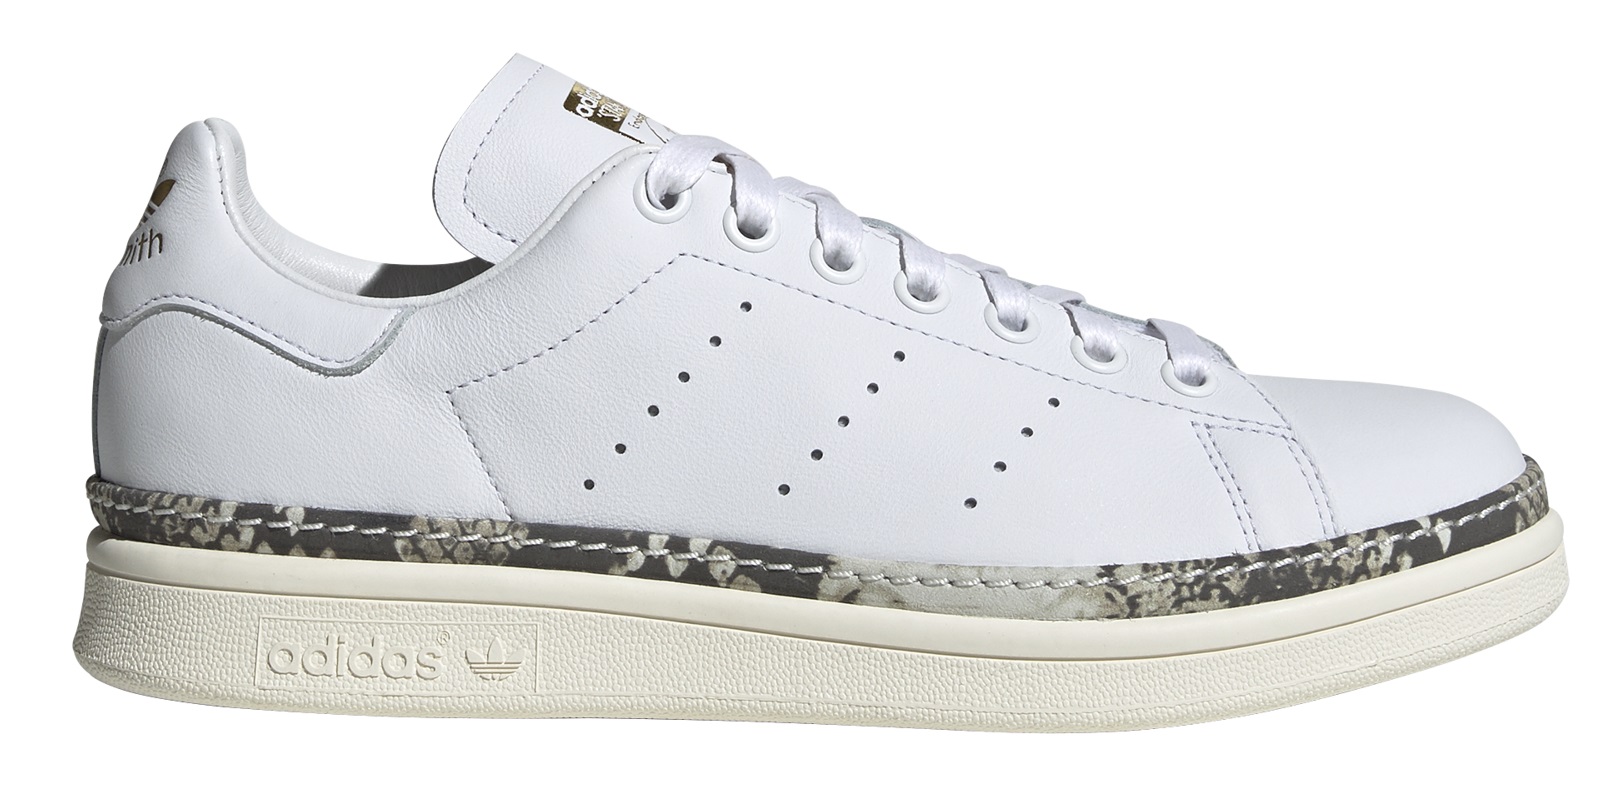 stan smith new release 2019